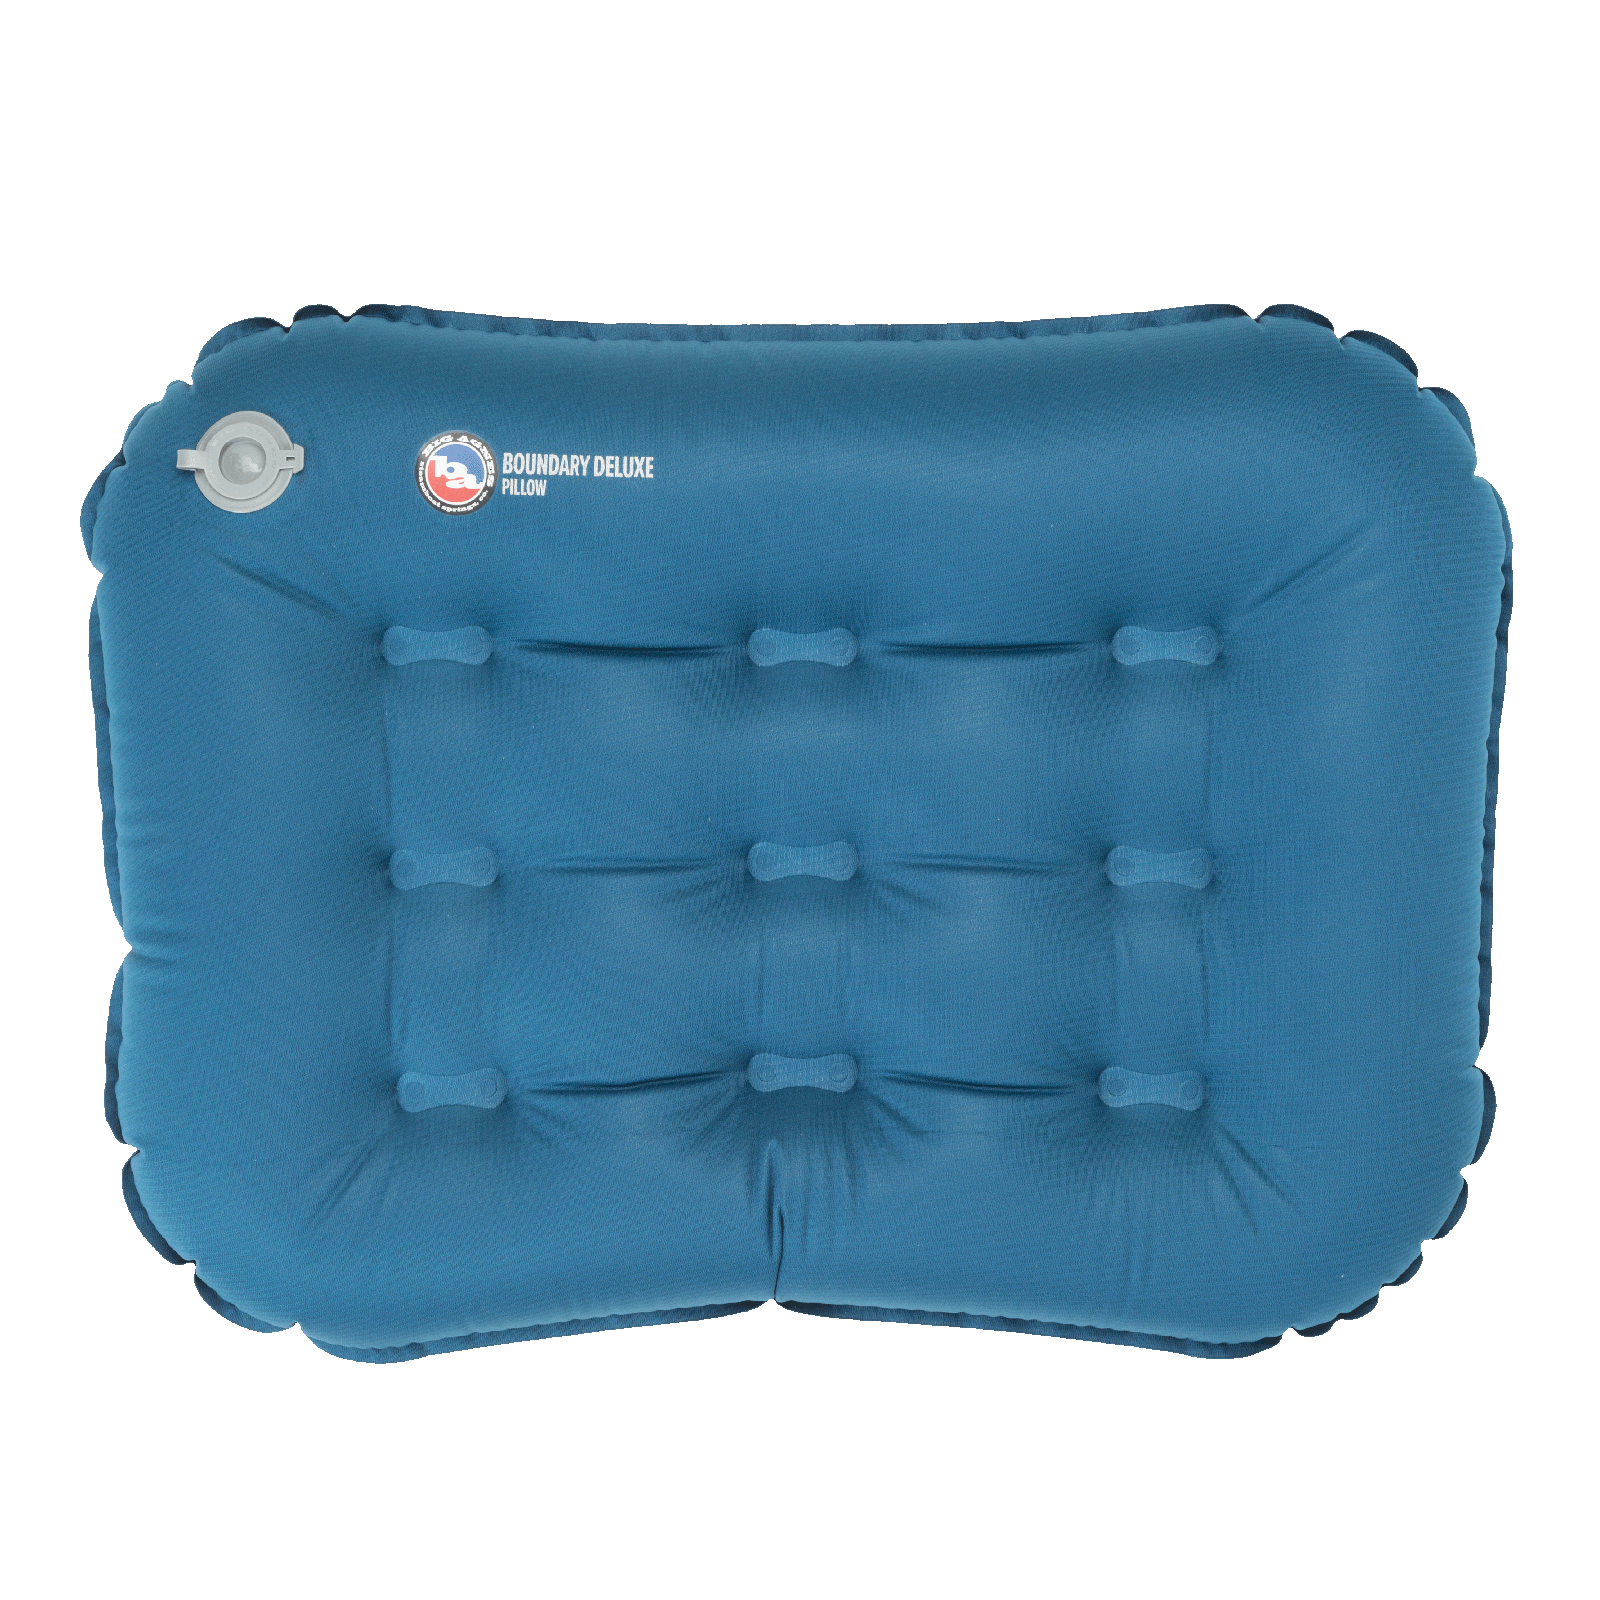 4 Pcs Inflatable Seat Cushions Airplane Seat Cushion Inflatable Cushion for